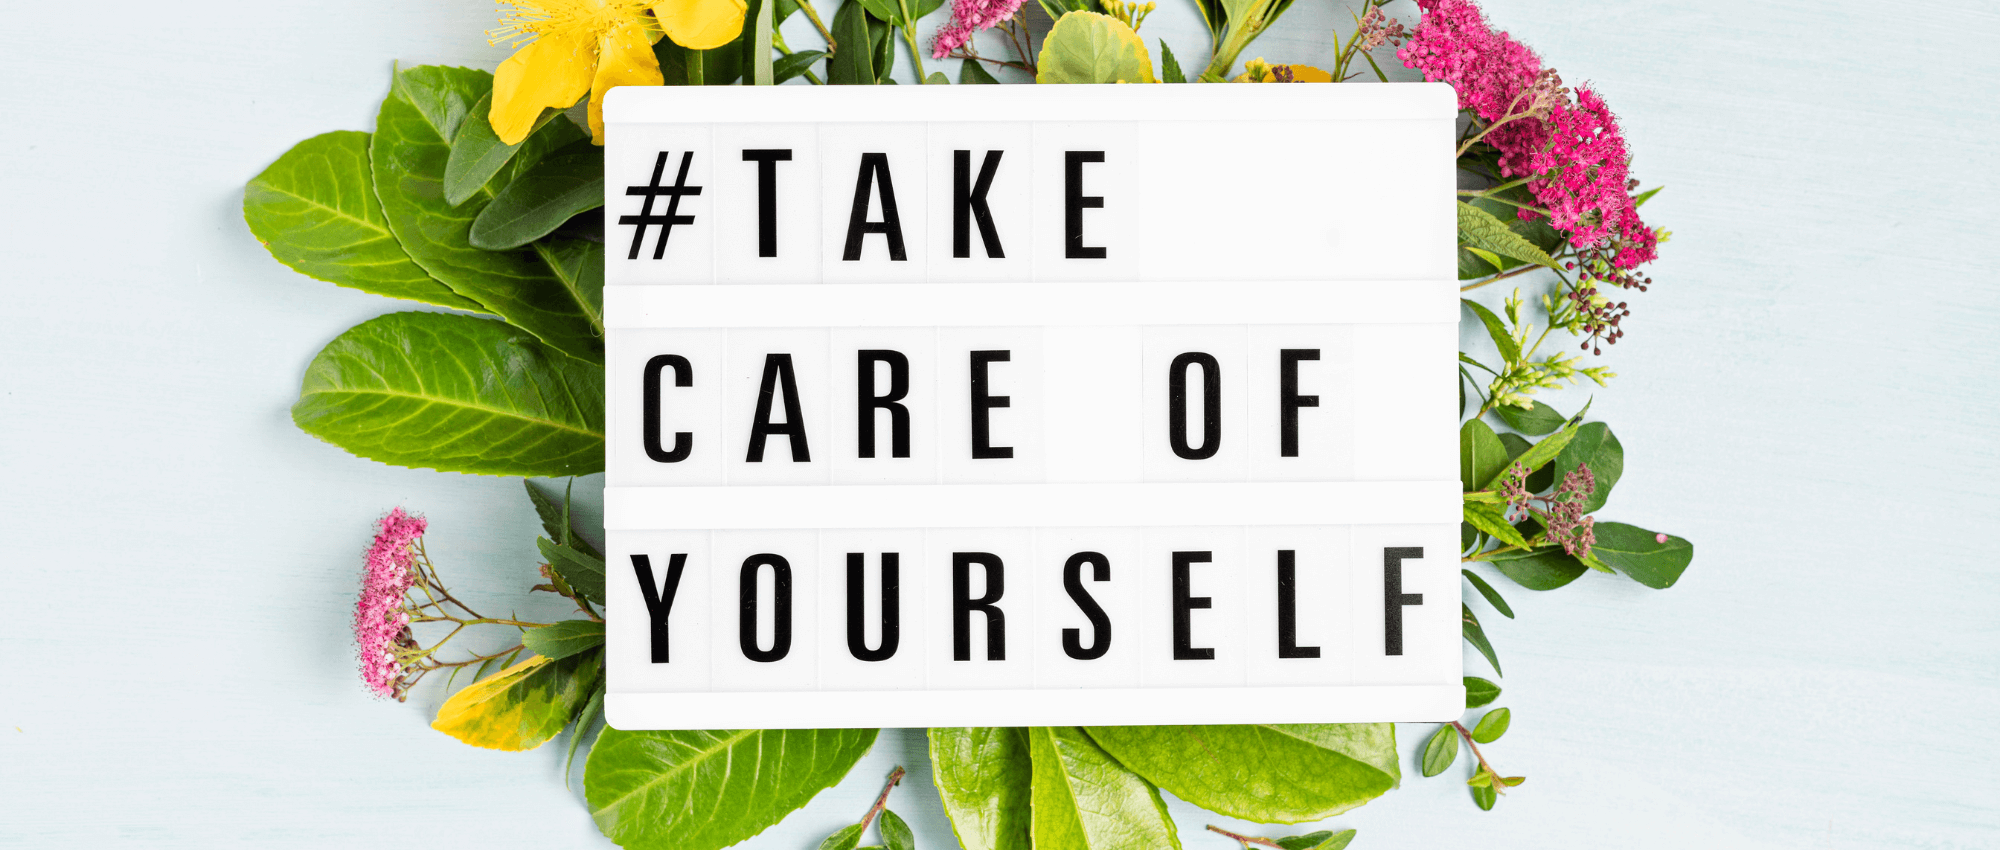 take care of yourself sign with flowers